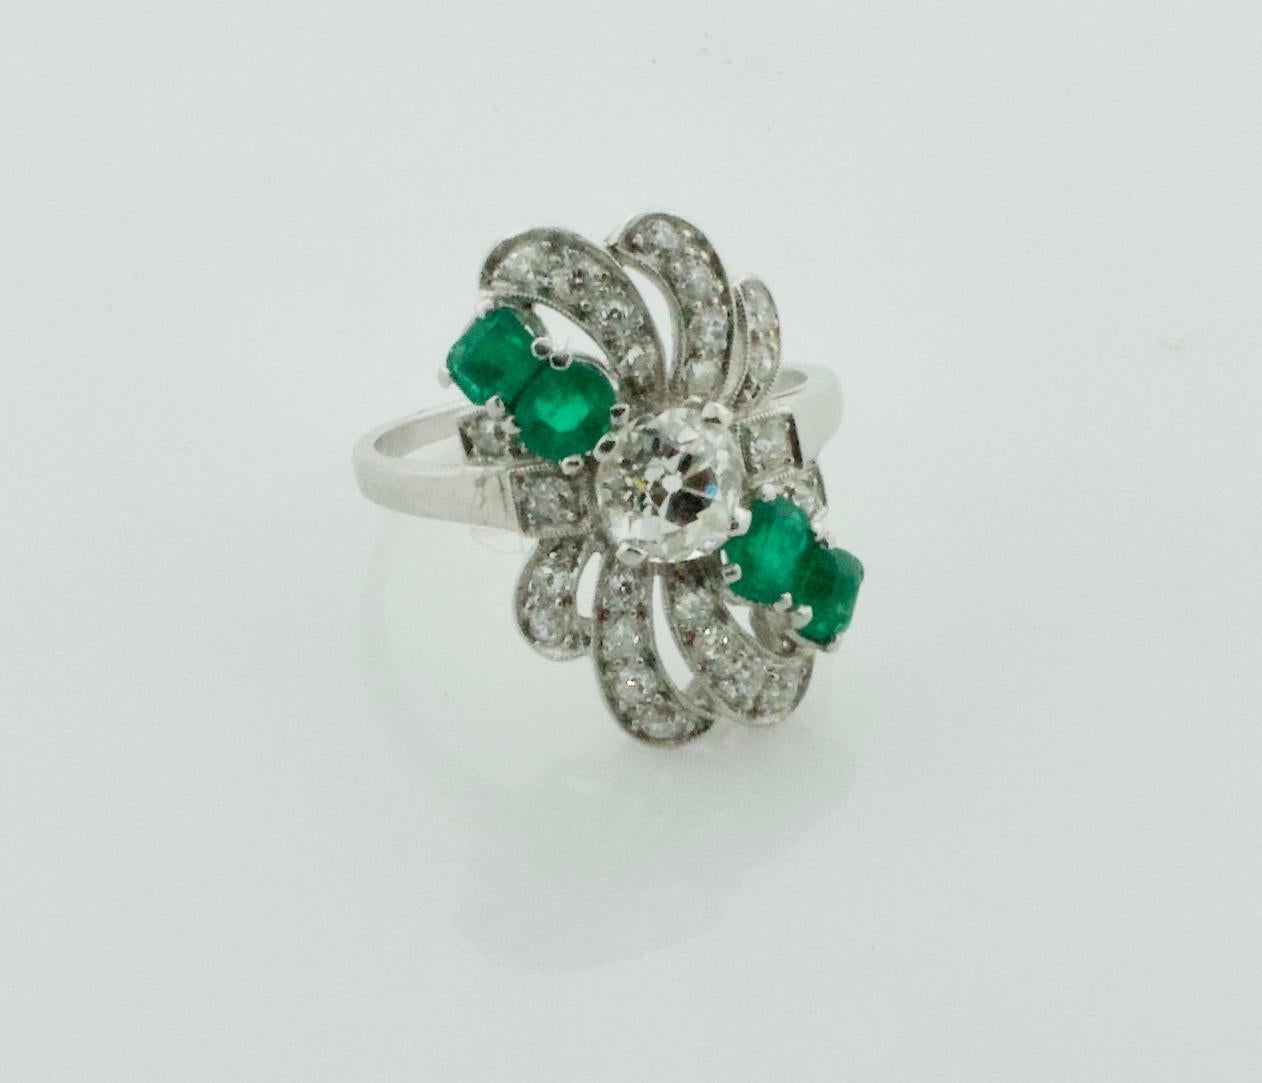 Circa 1930's Diamond and Emerald Ring in Platinum
One Old Mine Cut Diamond weighing .50 carats approximately [Near Colorless and Si1 no imperfections visible to the naked eye]
Four Cushion Cut Emeralds weighing .50 carats approximately
Twenty Four